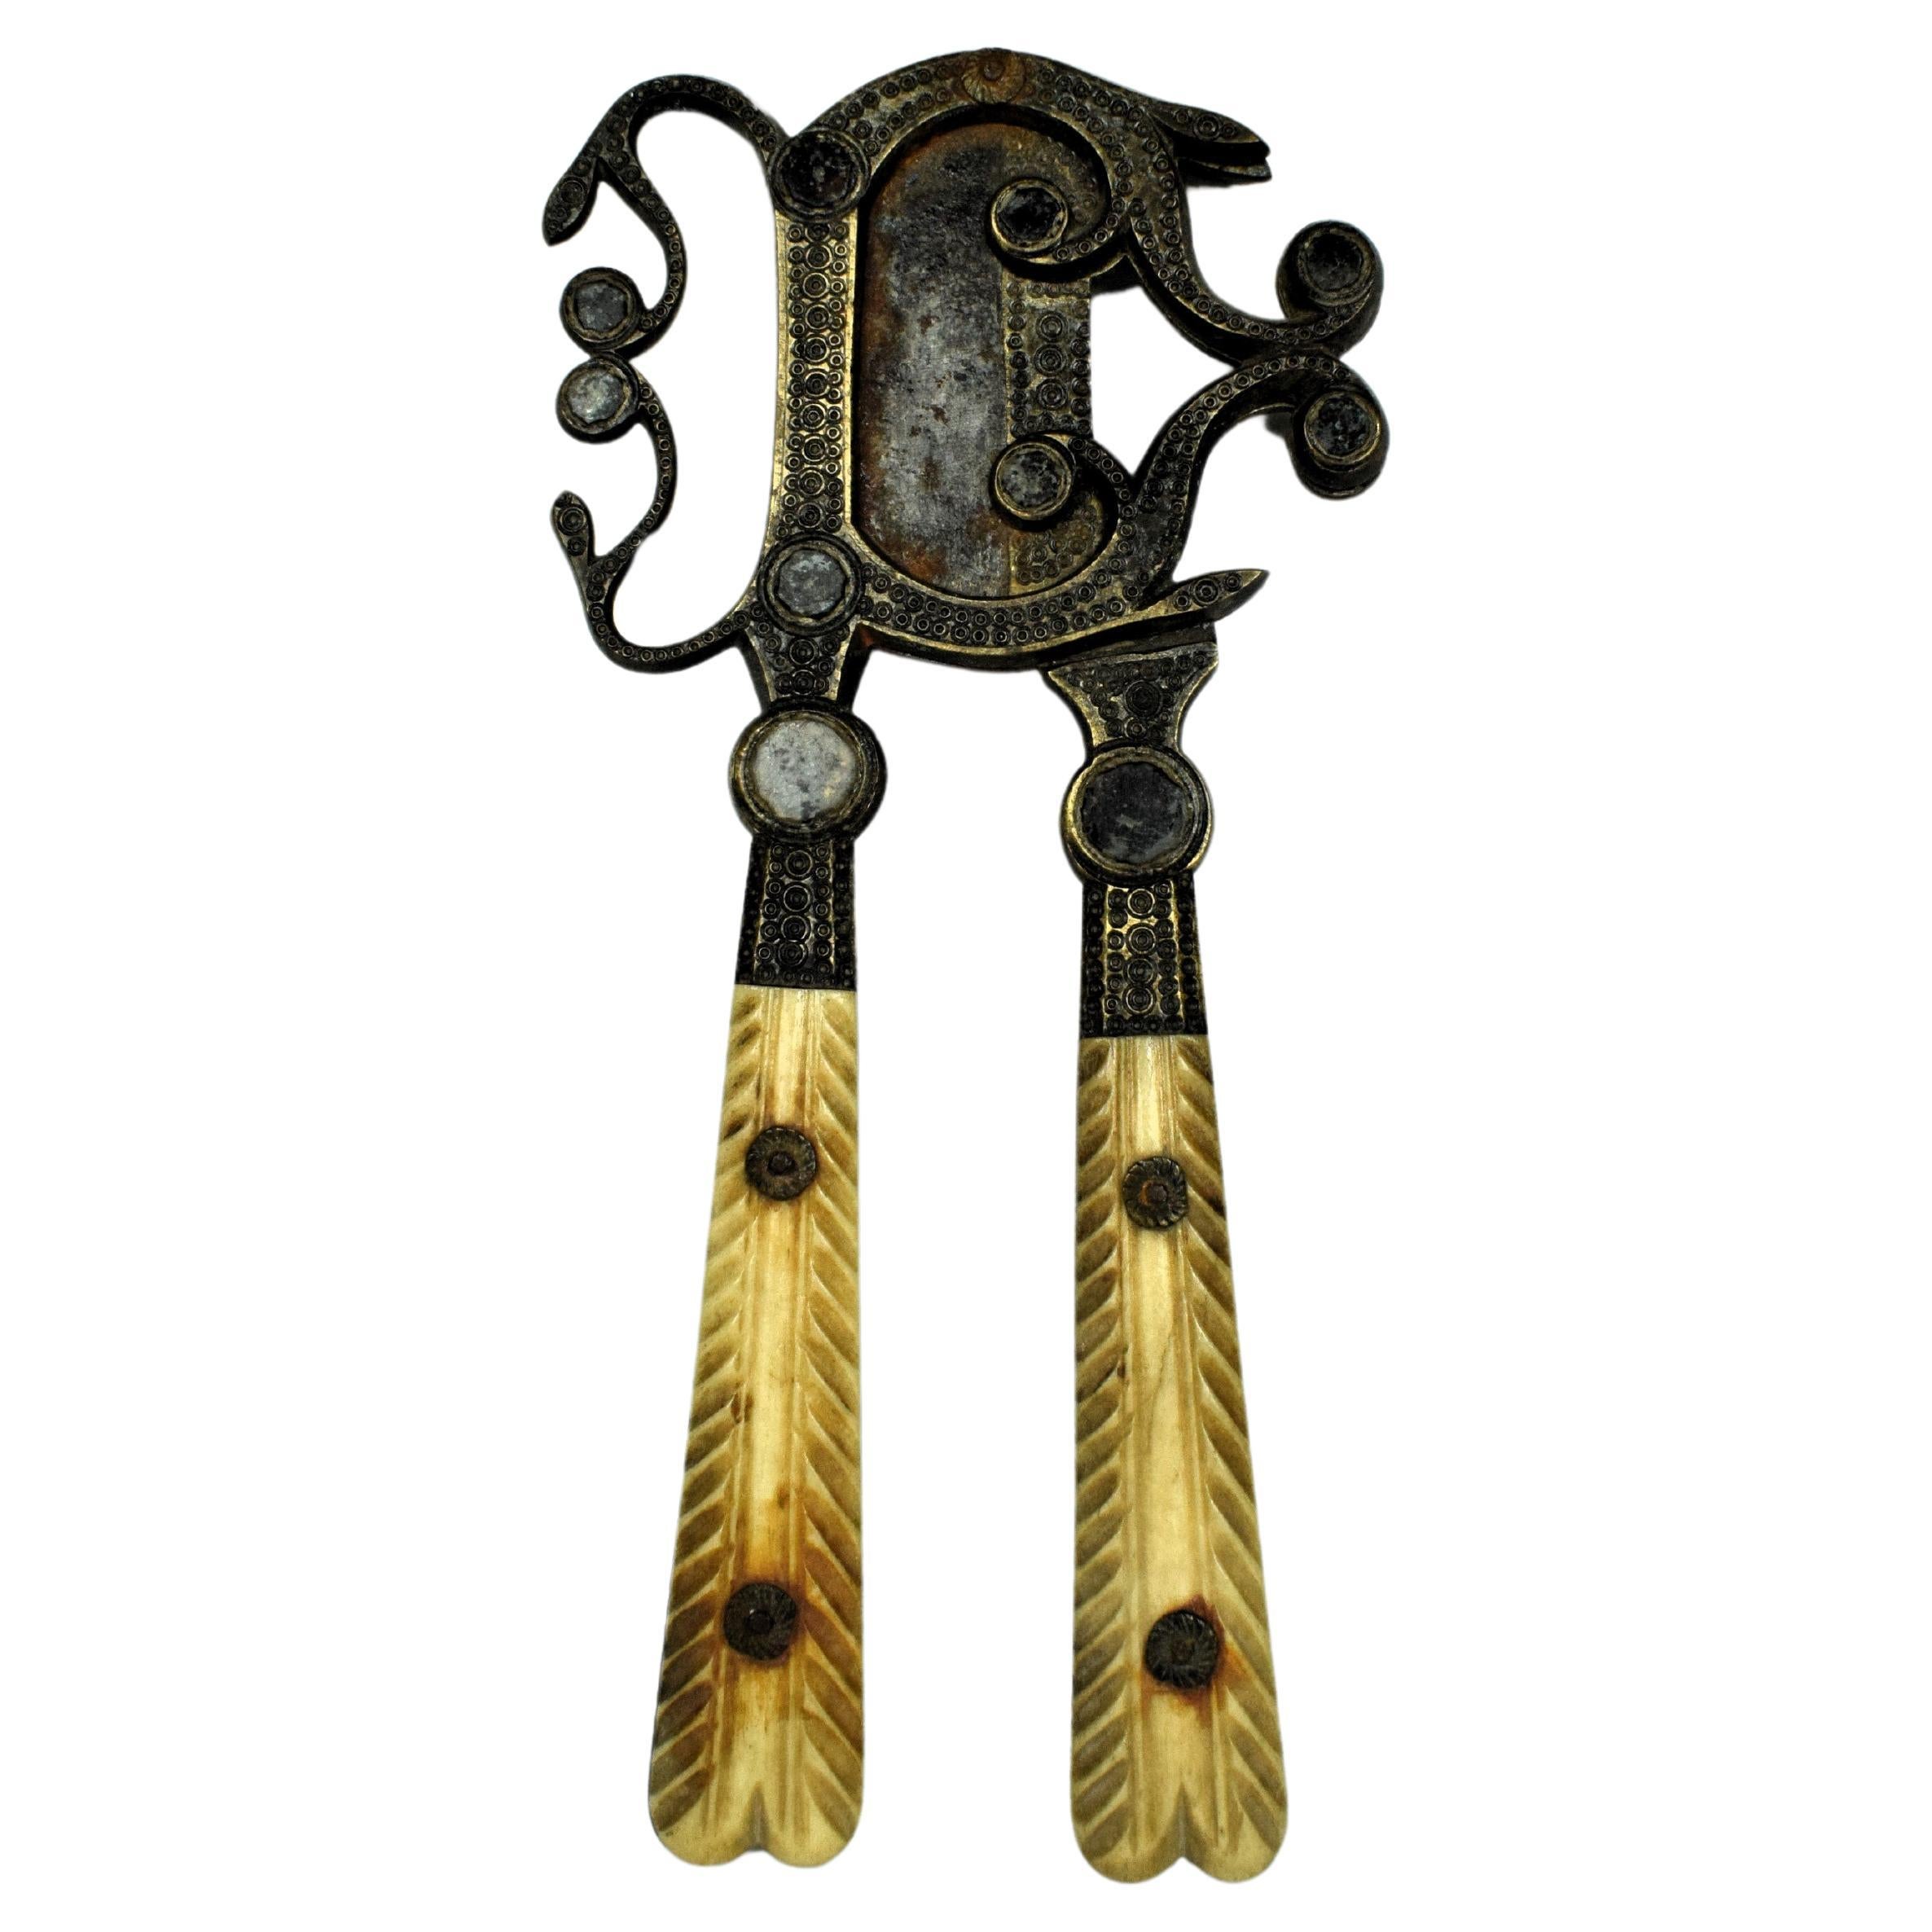 Mughal Indian Betel Nut Cutter, Mid 19th Century For Sale at 1stDibs